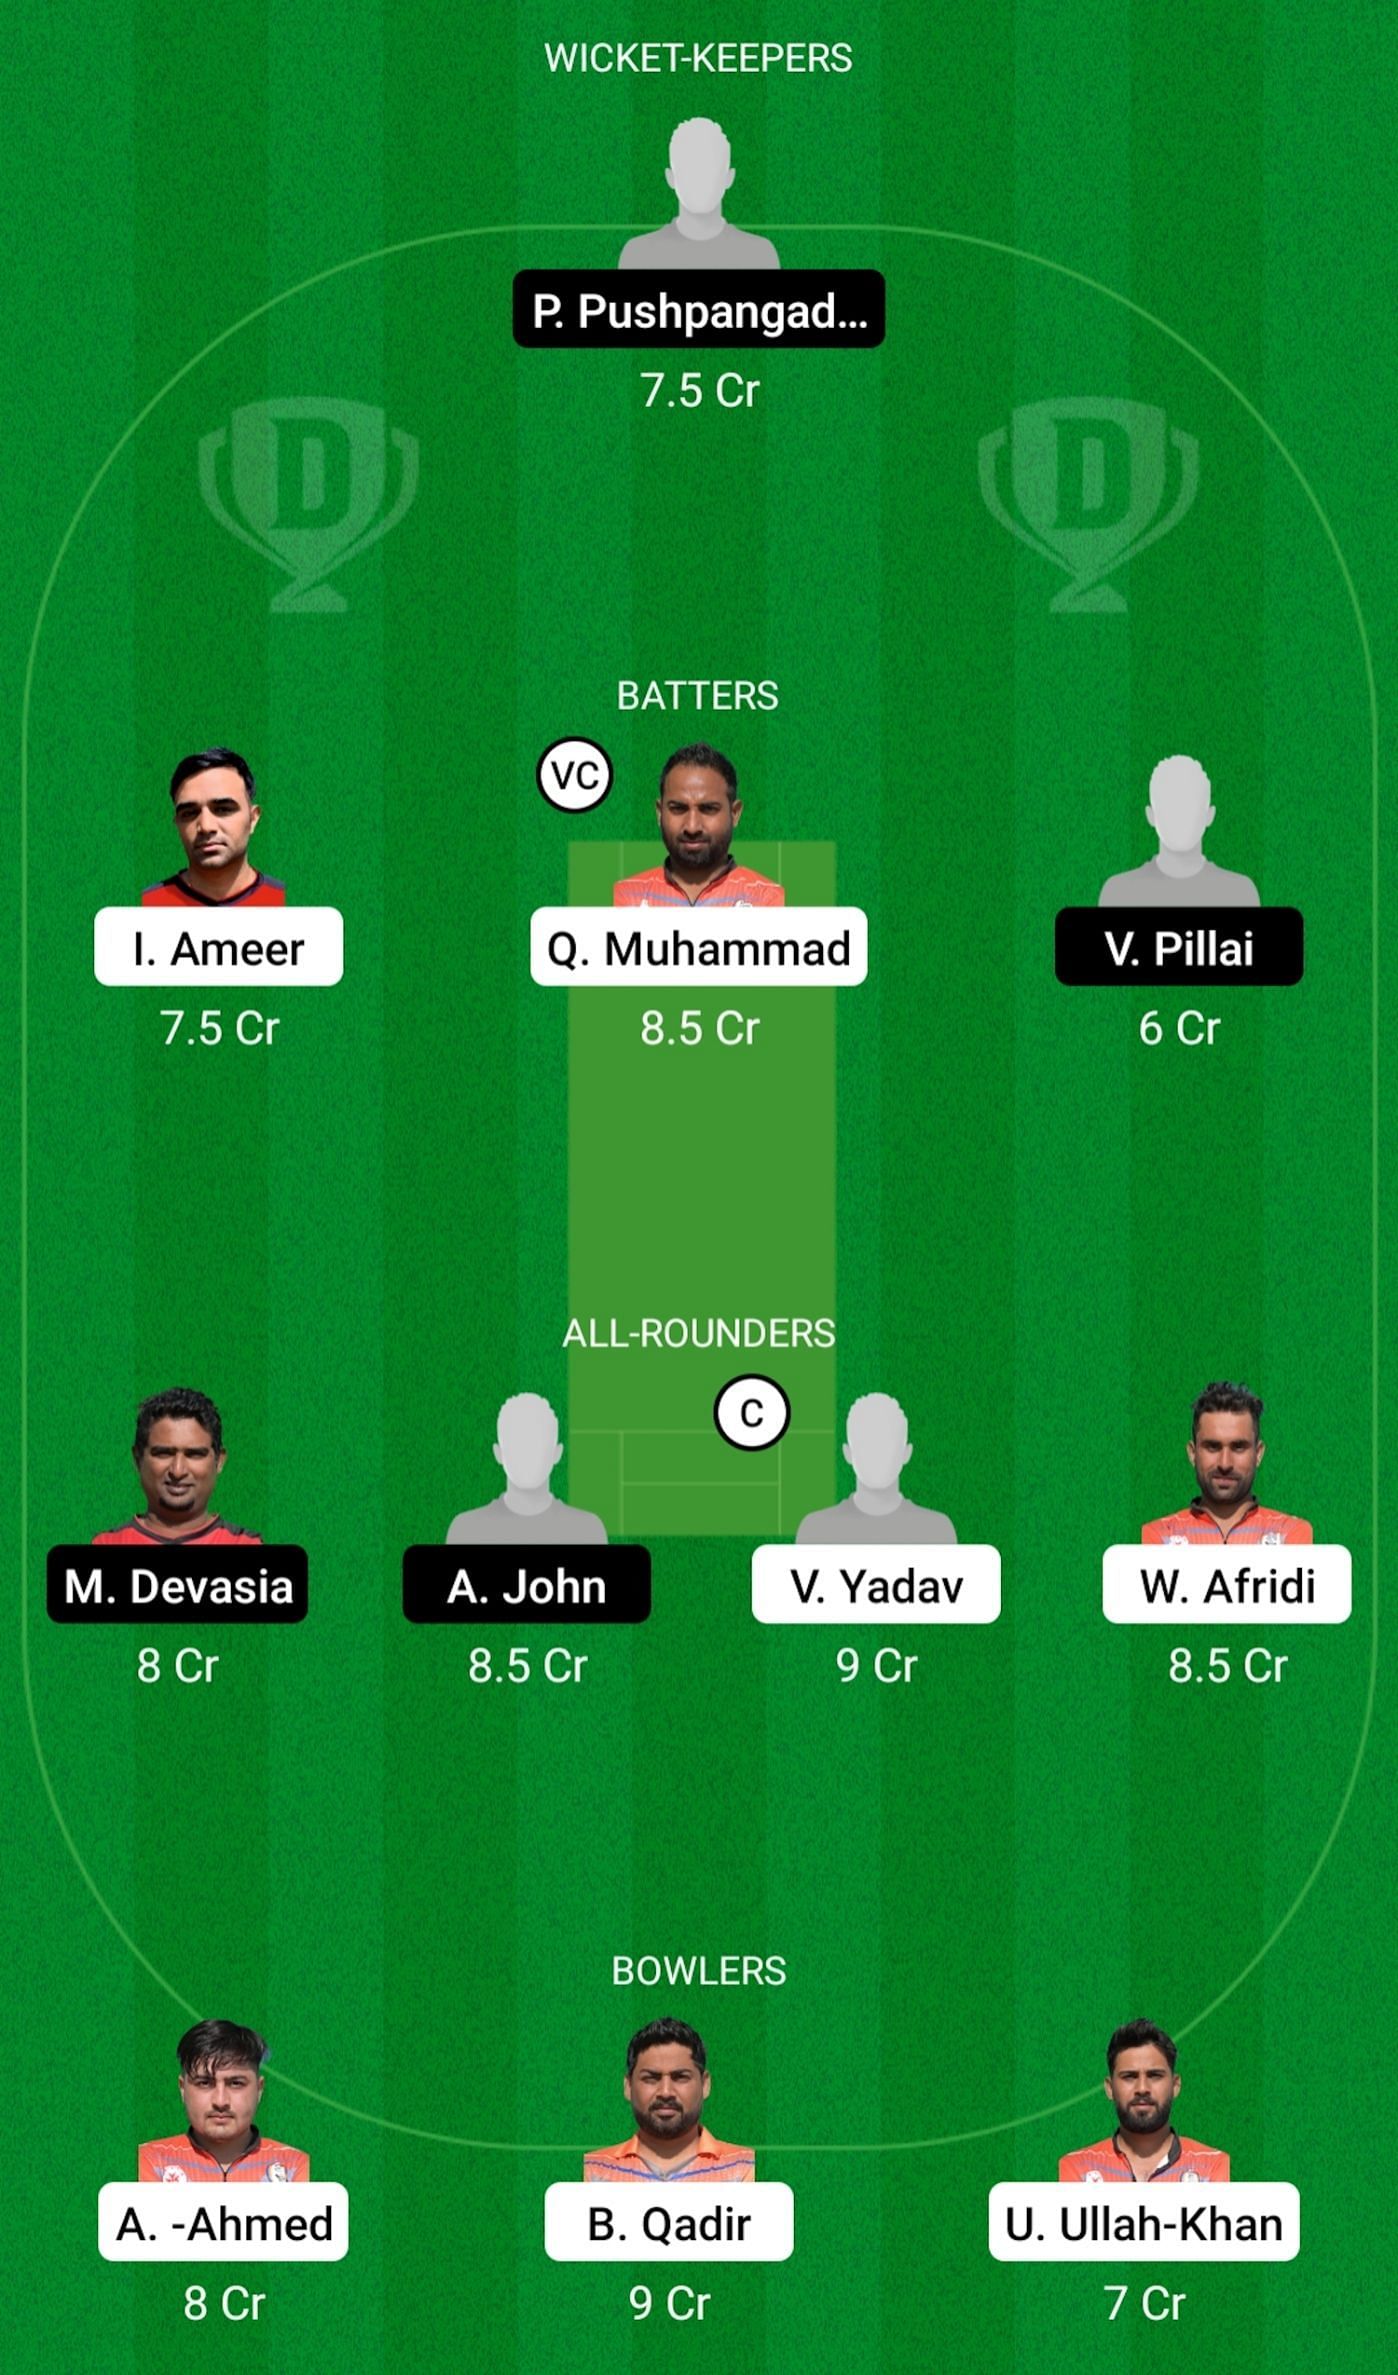 SWU vs VLS Dream11 Prediction Team Today, Match 80 and 81, Head-to-Head League